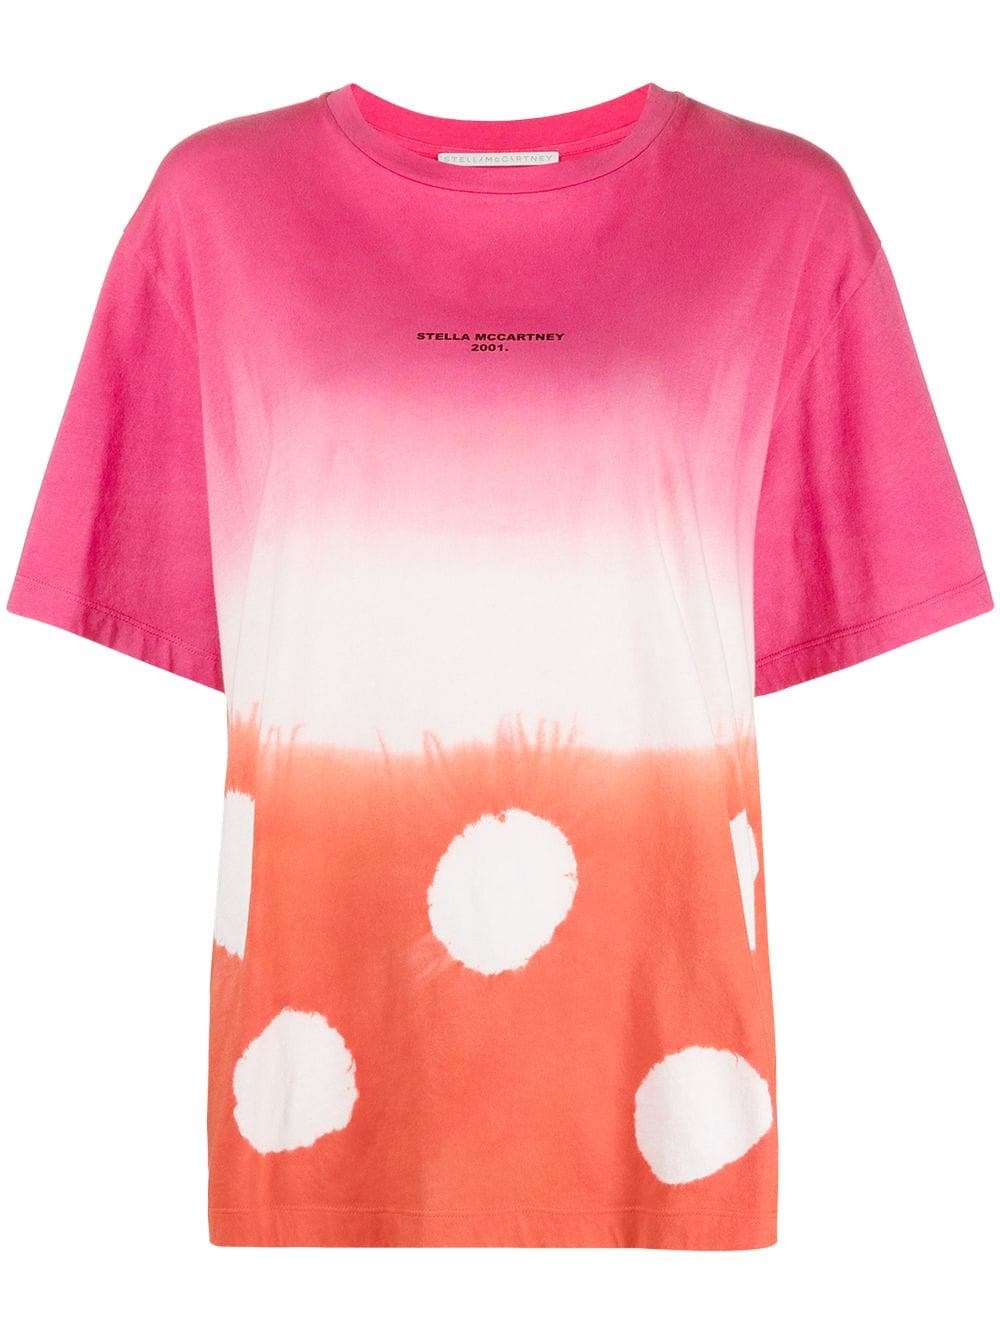 stella mccartney PRINTED T-SHIRT available on montiboutique.com 